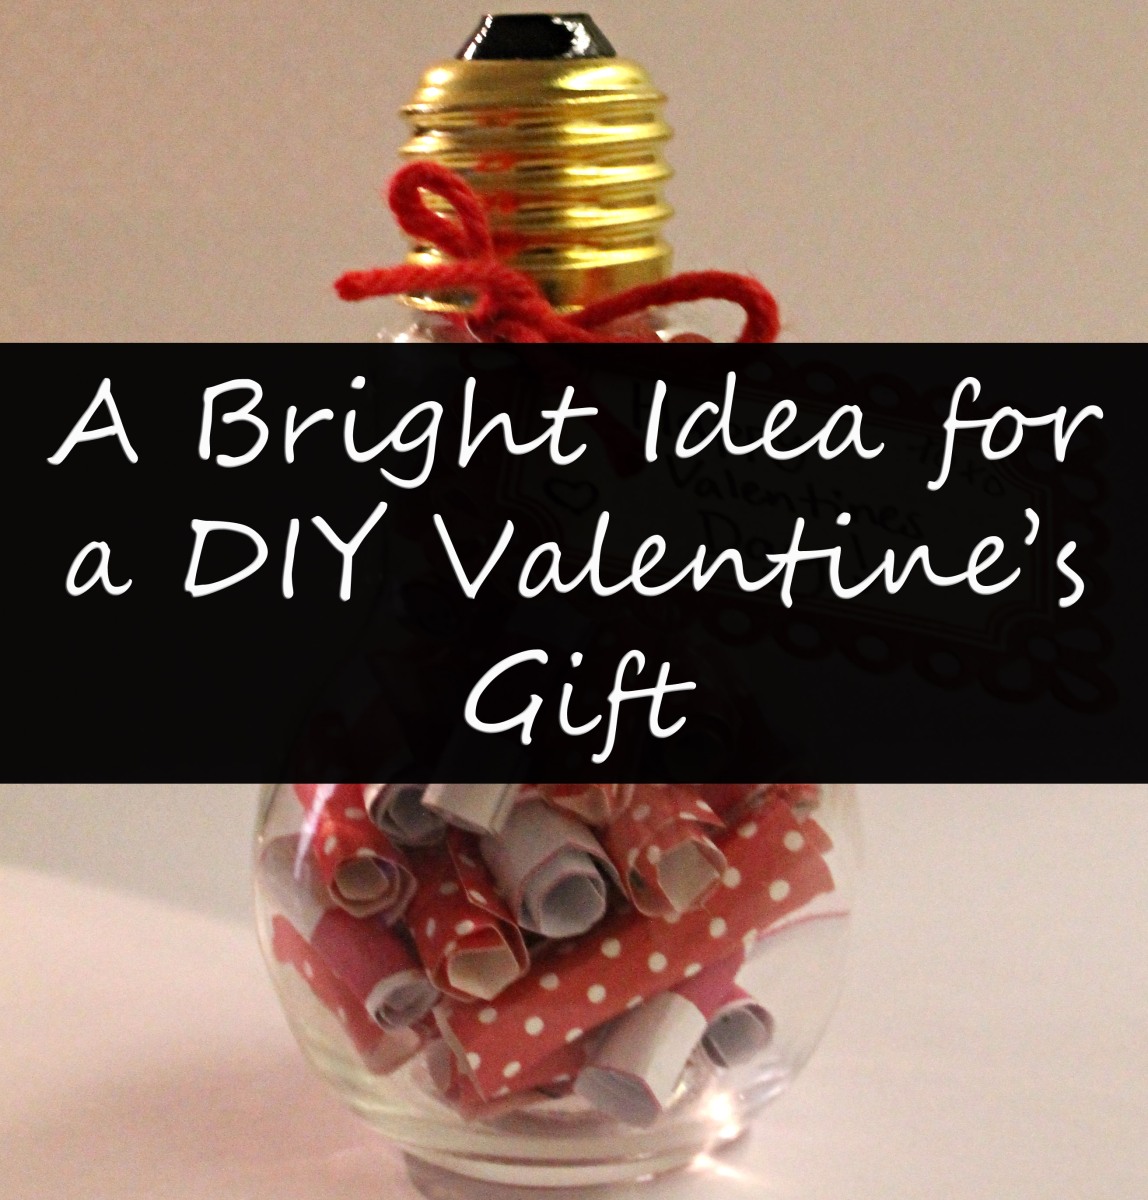 A Bright Idea for a DIY Valentine’s Gift | DIY: How does ...